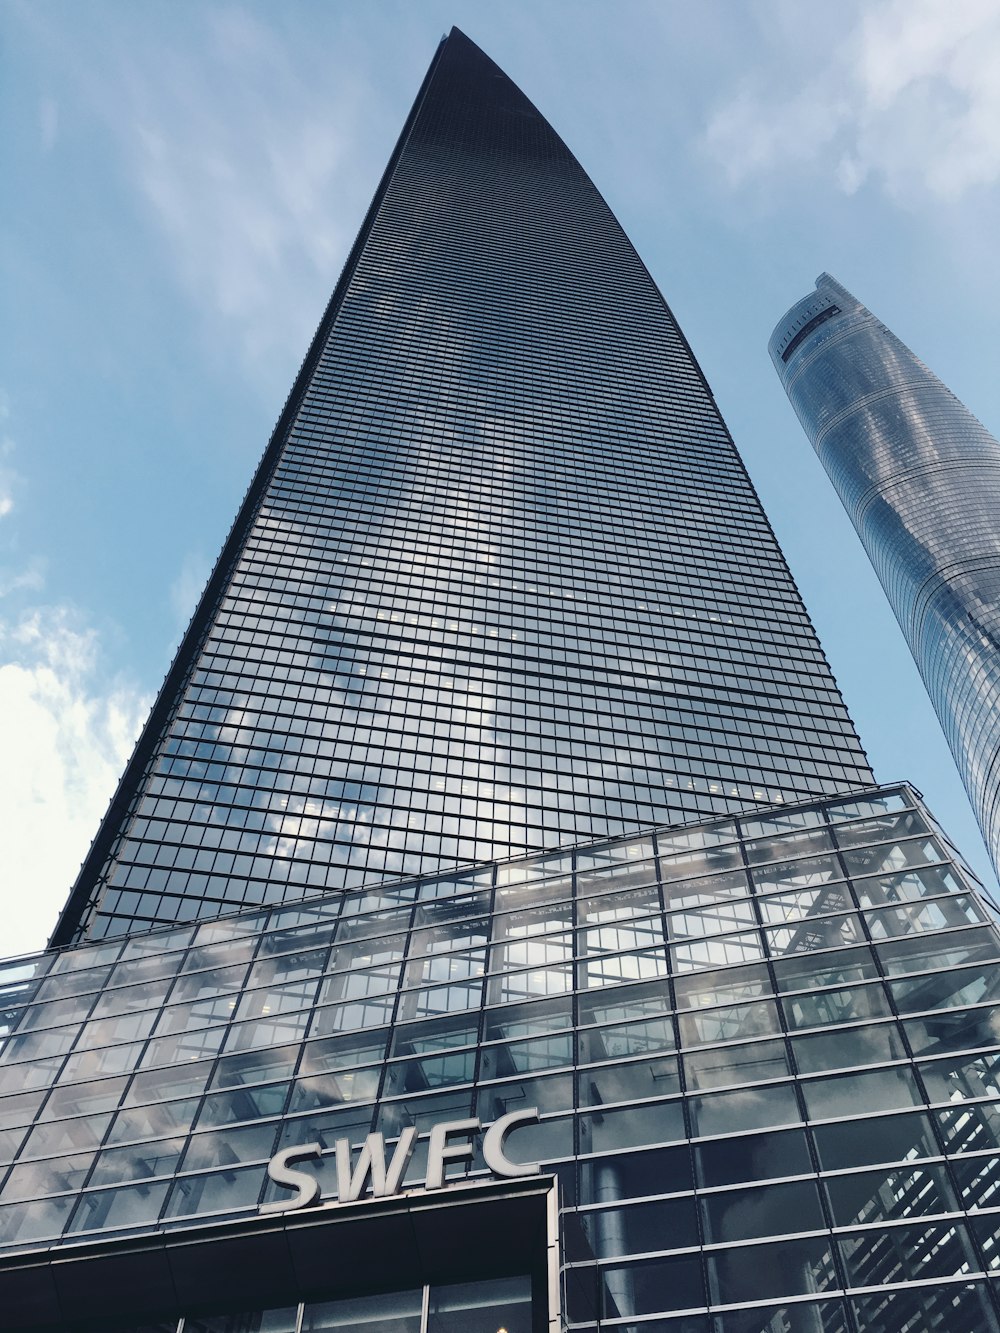 low angle photography of glass building under blue sky during daytime